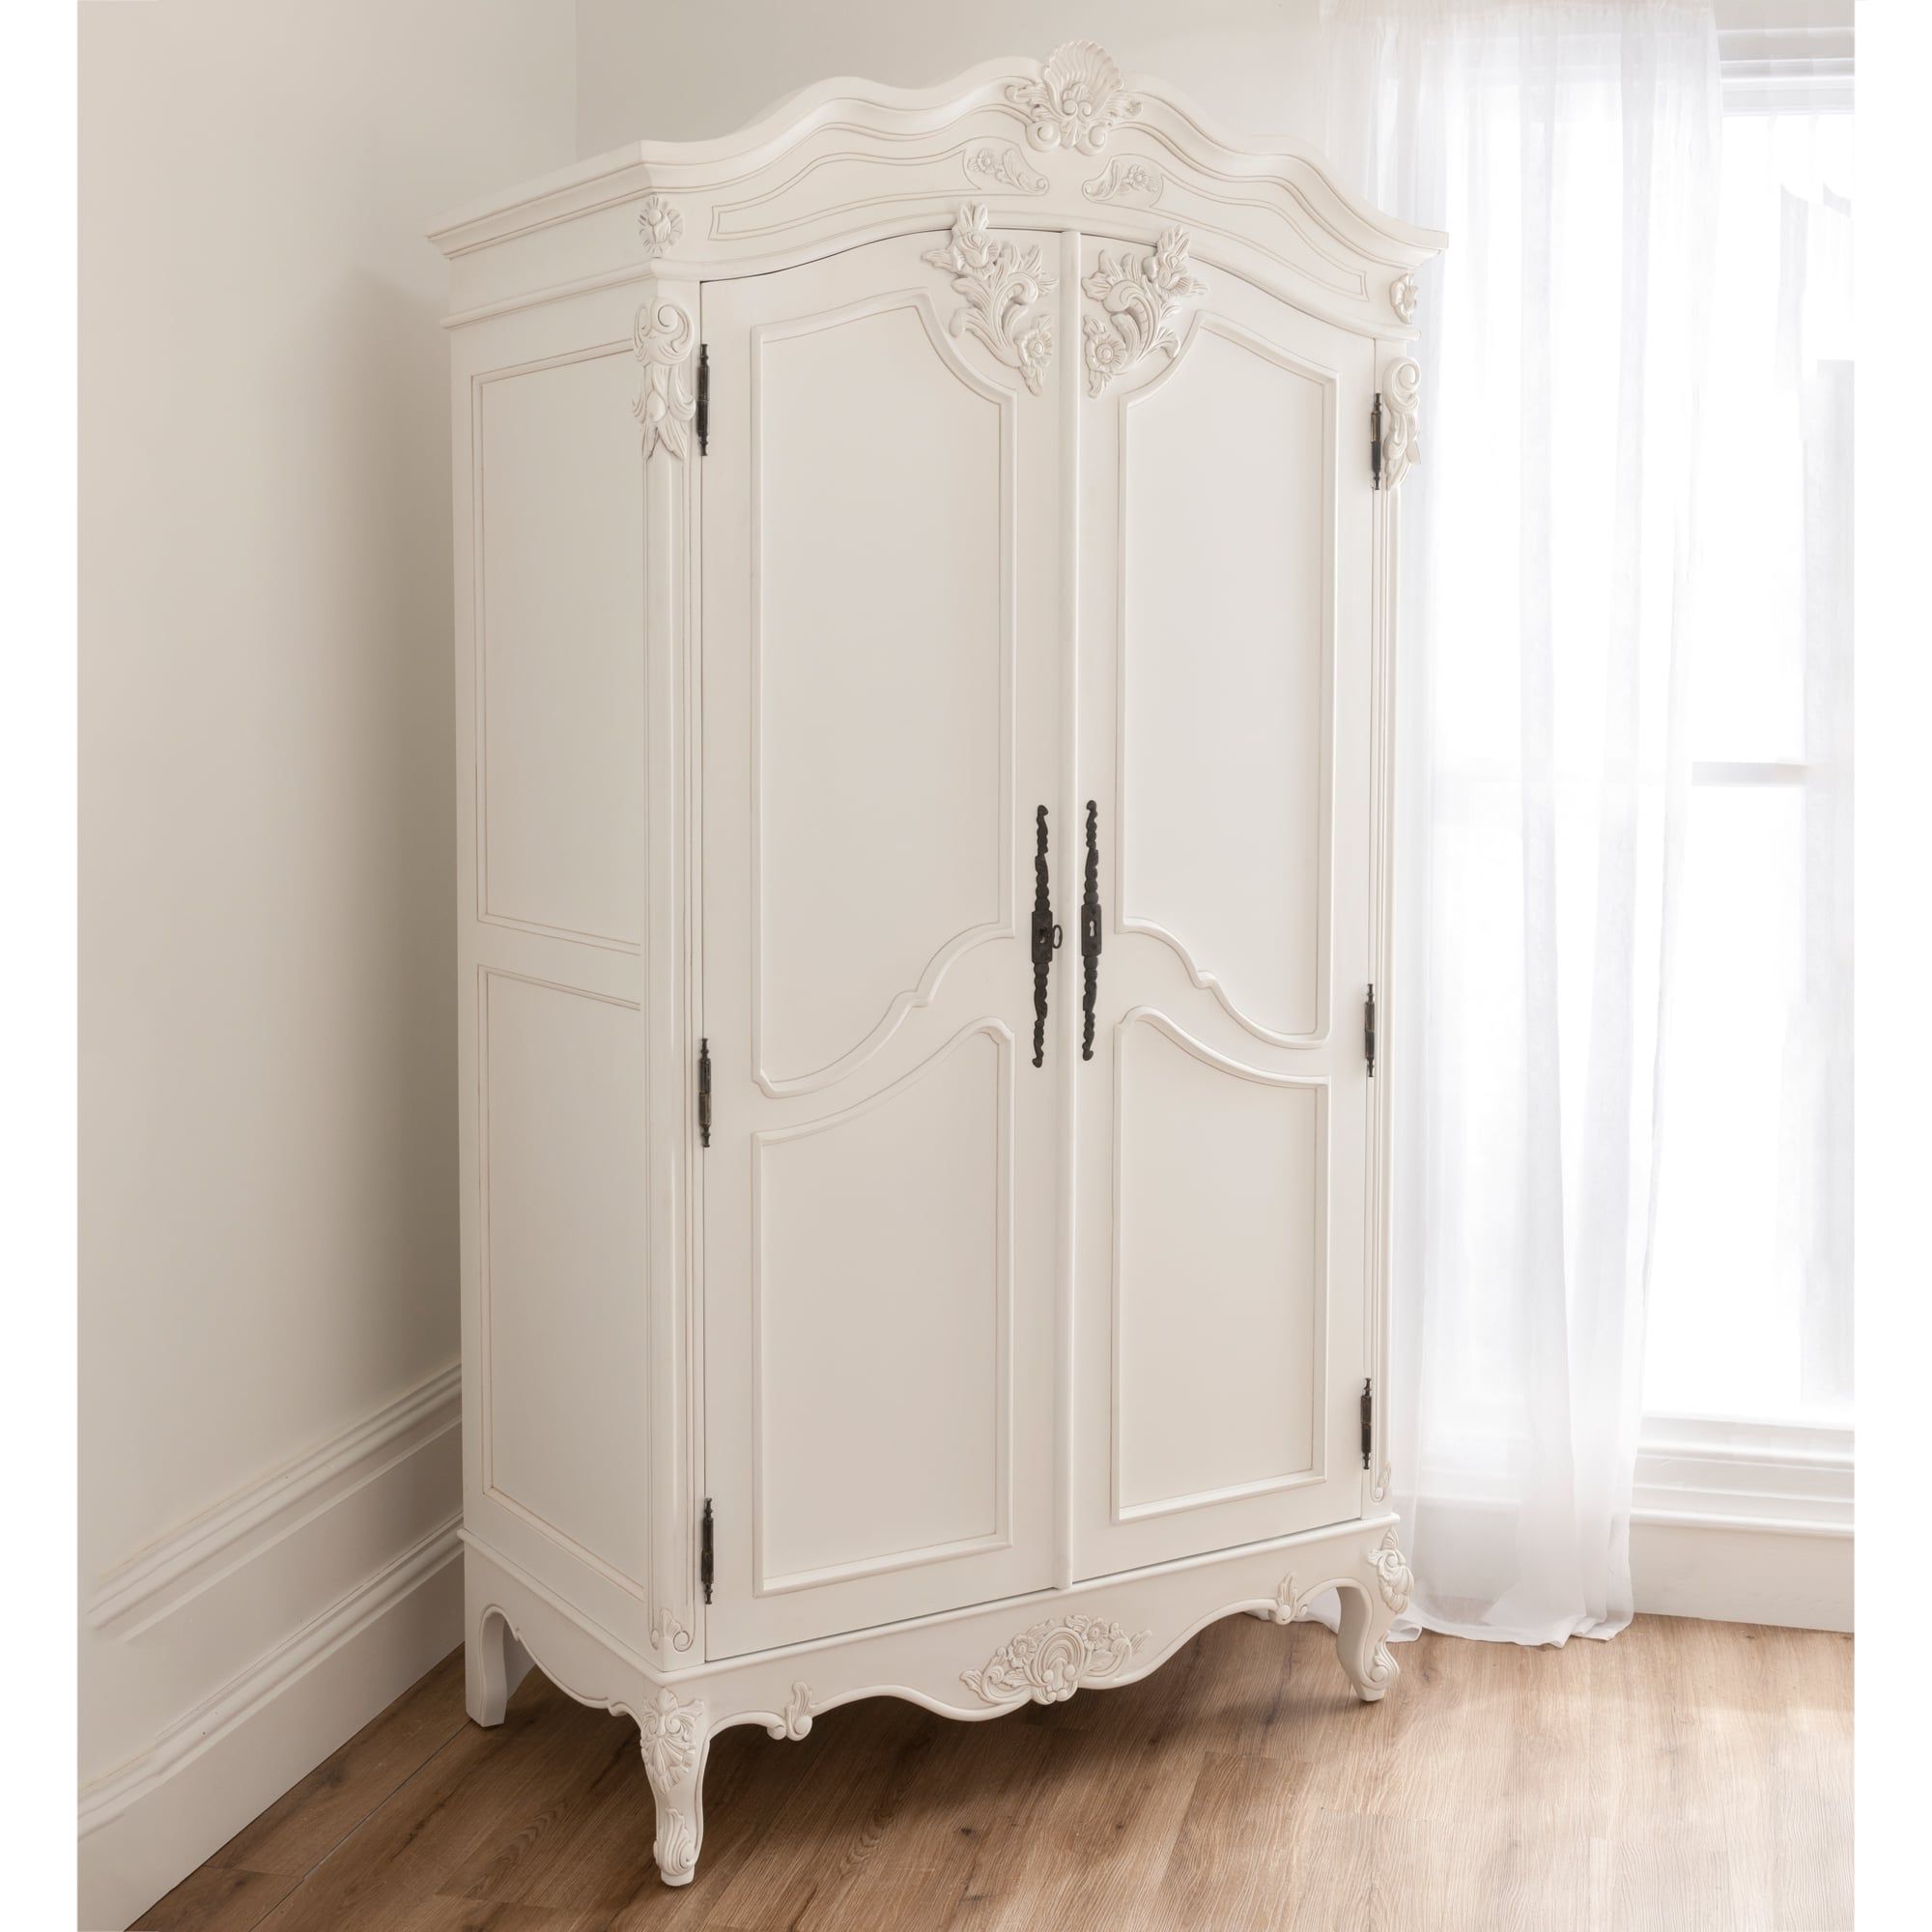 Baroque Antique French Wardrobe Is Available Online At Homesdirect365 Pertaining To French Style Armoires Wardrobes (Gallery 4 of 20)